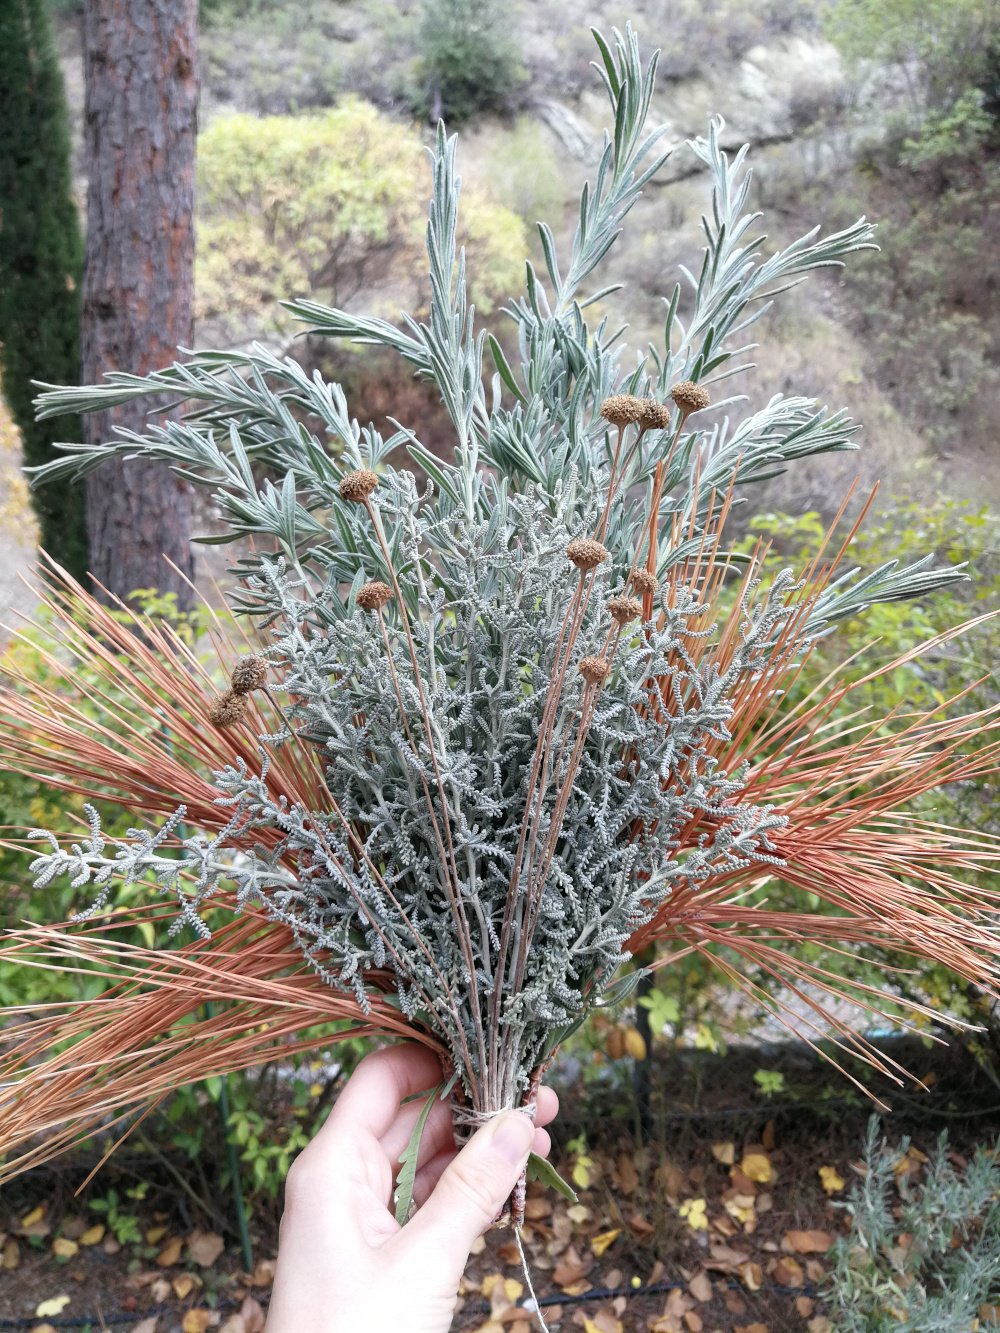 A white left hand is holding a bunch of lavender and lavender cotton cuttings and long with dried lavender cotton flowers and dried copper coloured pine needles around the left and right edges to make a bouquet. The background is greenery.